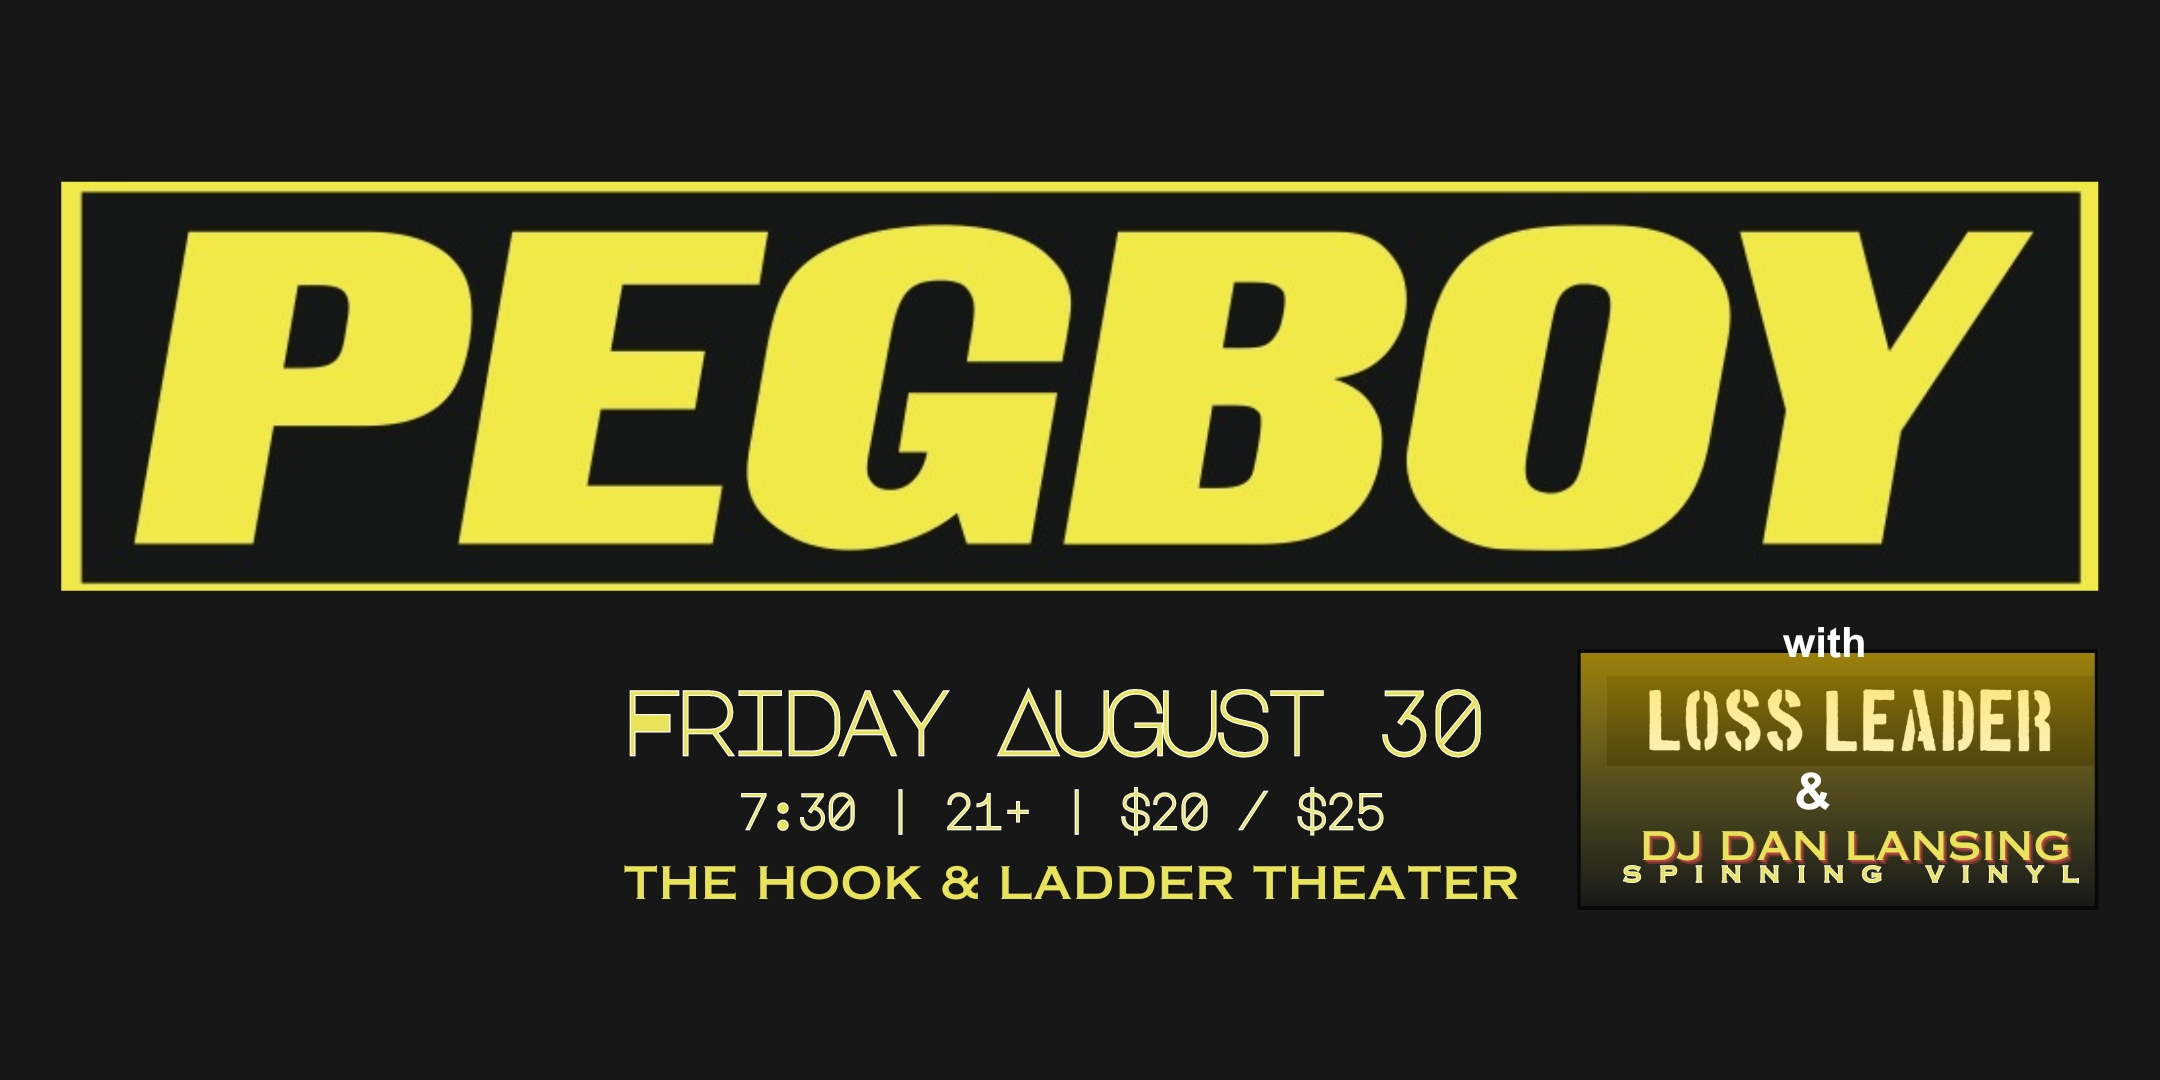 Pegboy with Loss Leader + DJ Dan Lansing Spinning Vinyl Friday, August 30 The Hook and Ladder Theater Doors 7:30pm :: Music 7:30pm :: 21+ $20 ADV / $25 DOS General Admission * Does not include fees